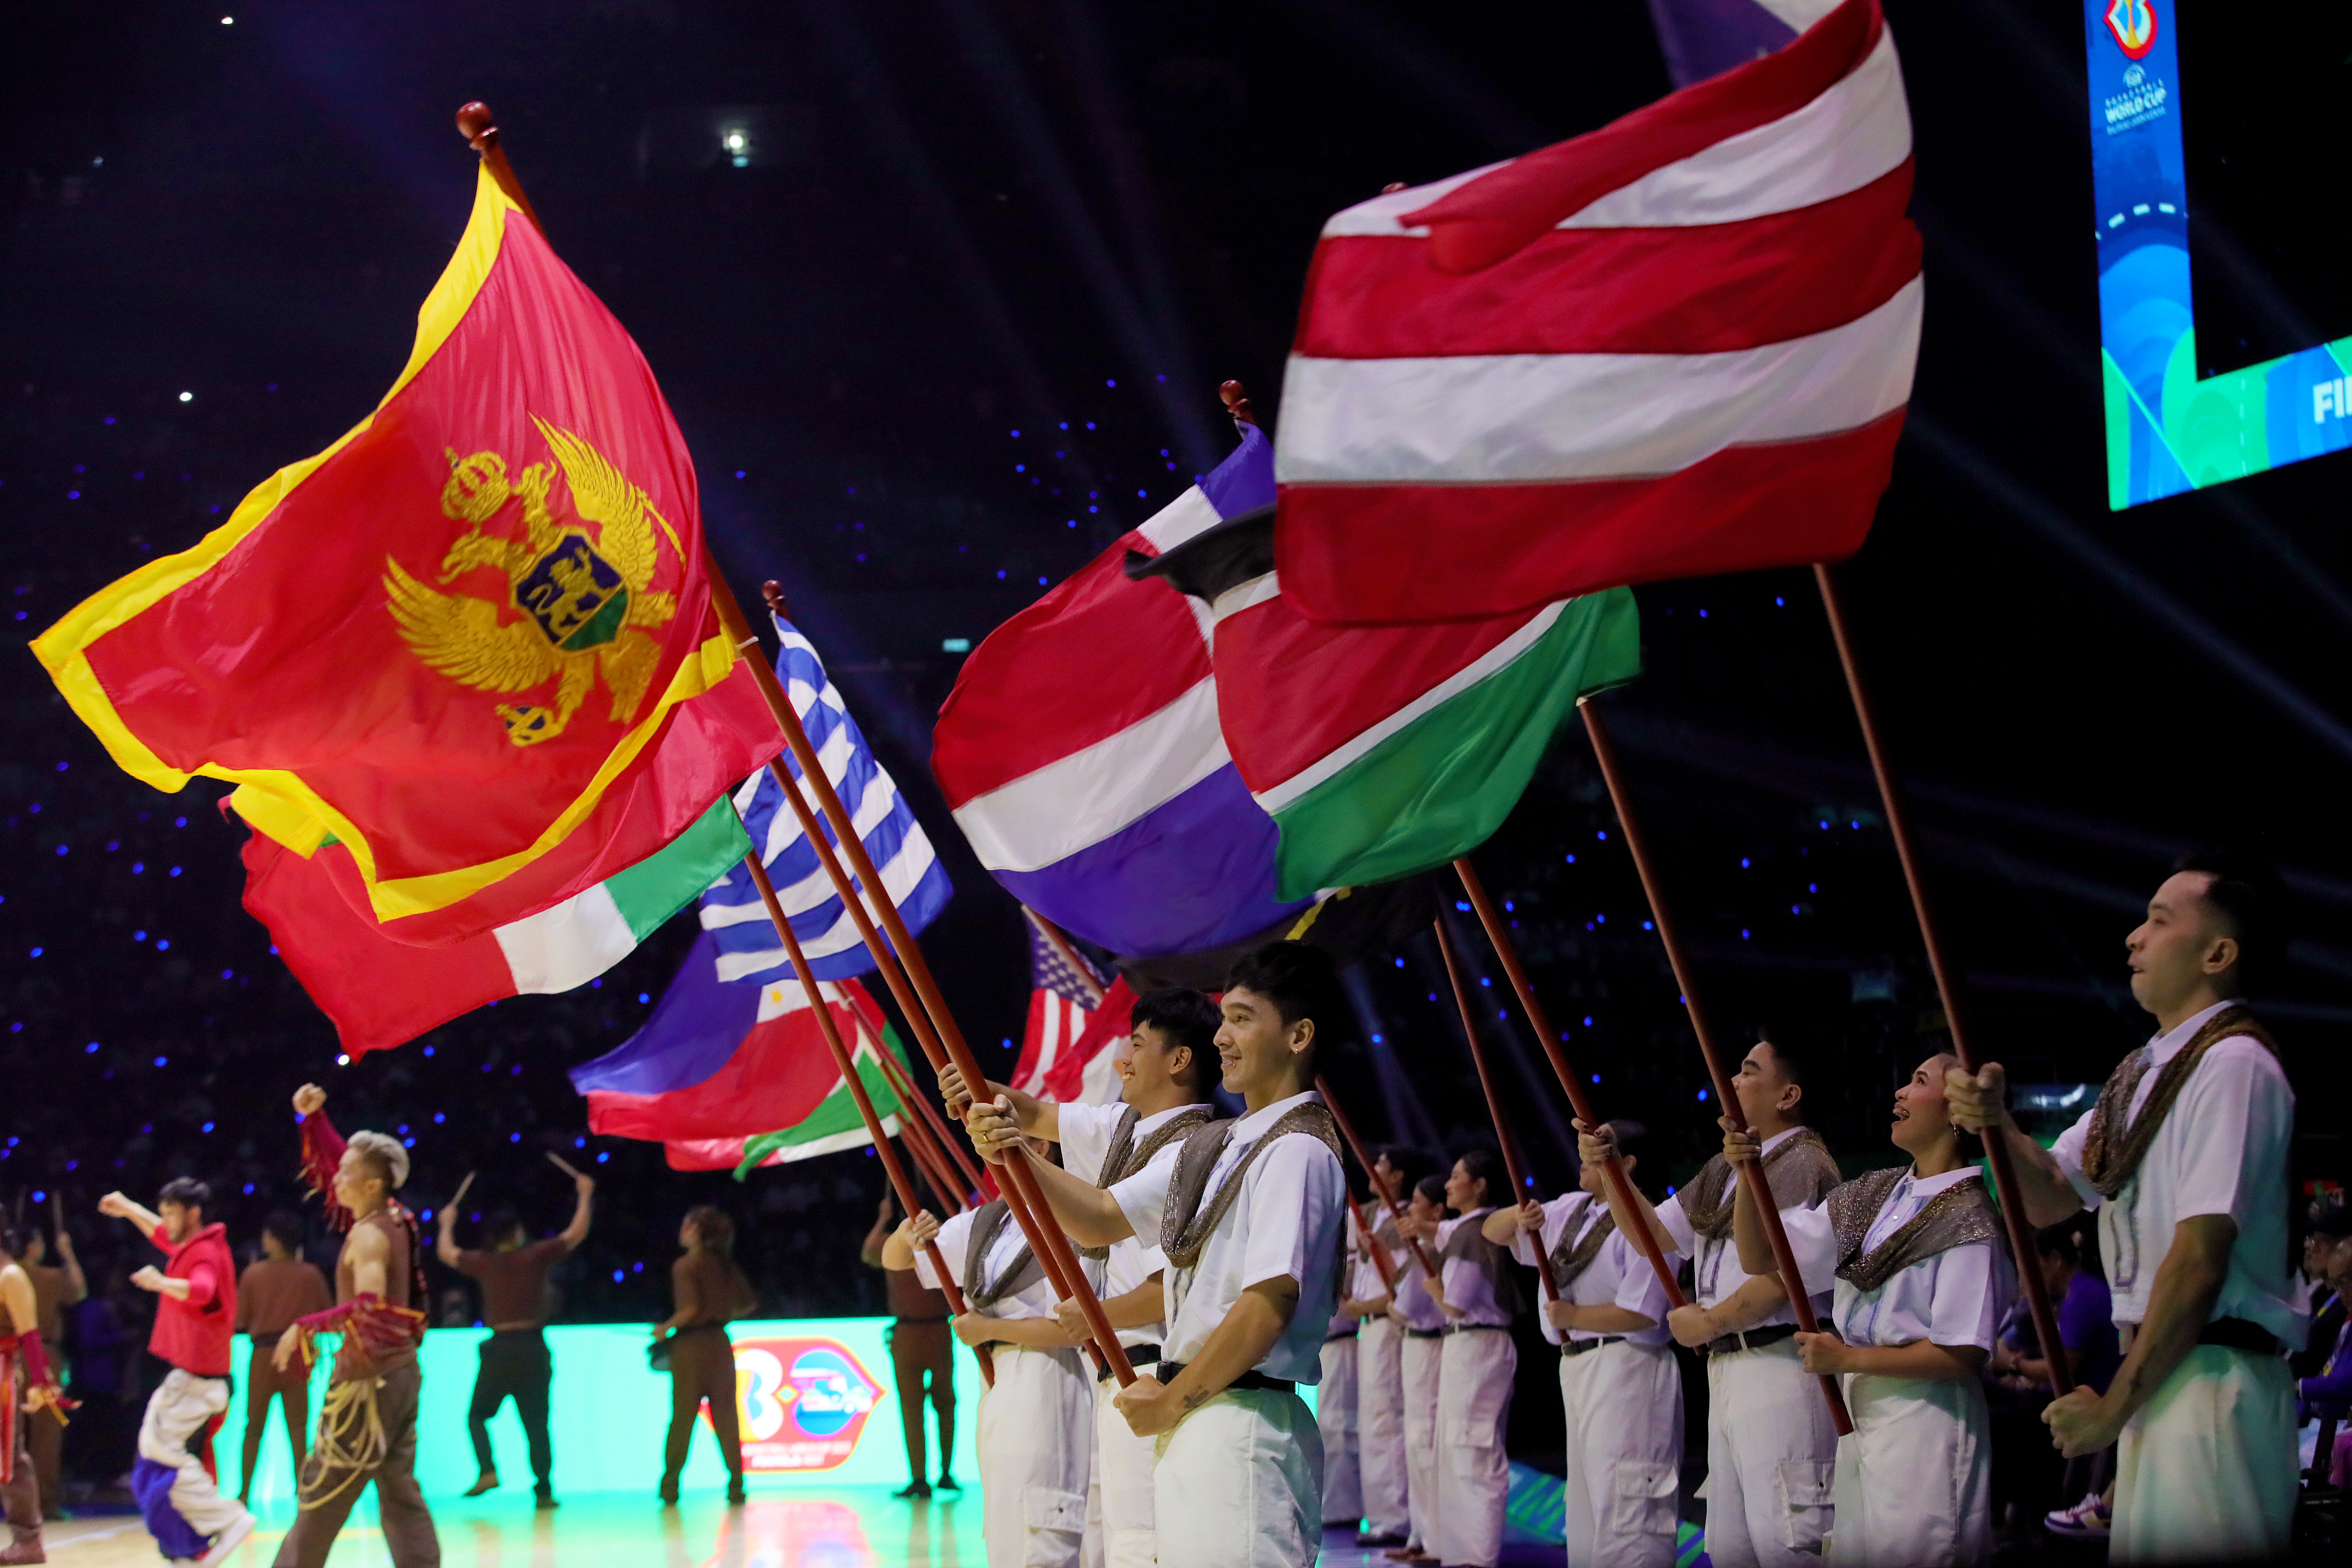 Country's join the FIBA World Cup opening